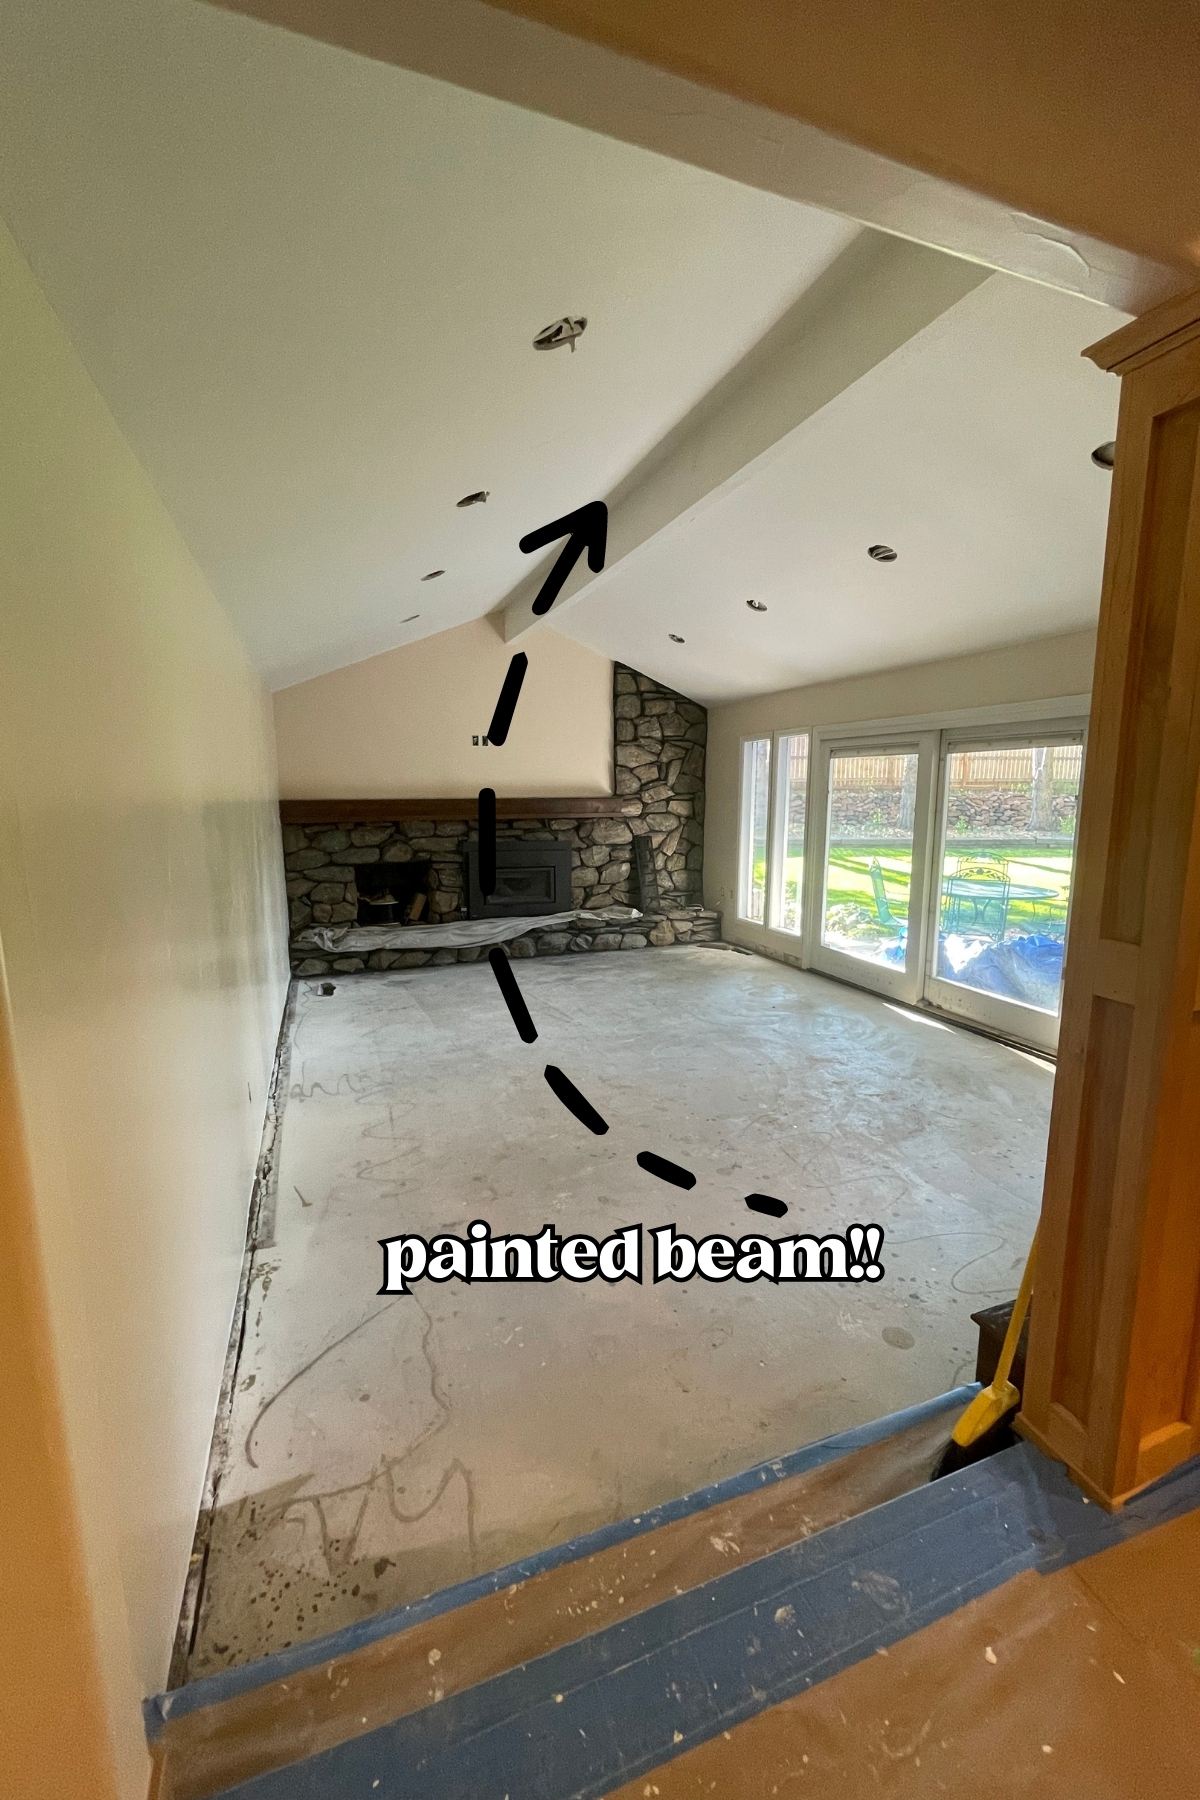 Family room with painted beam and walls.